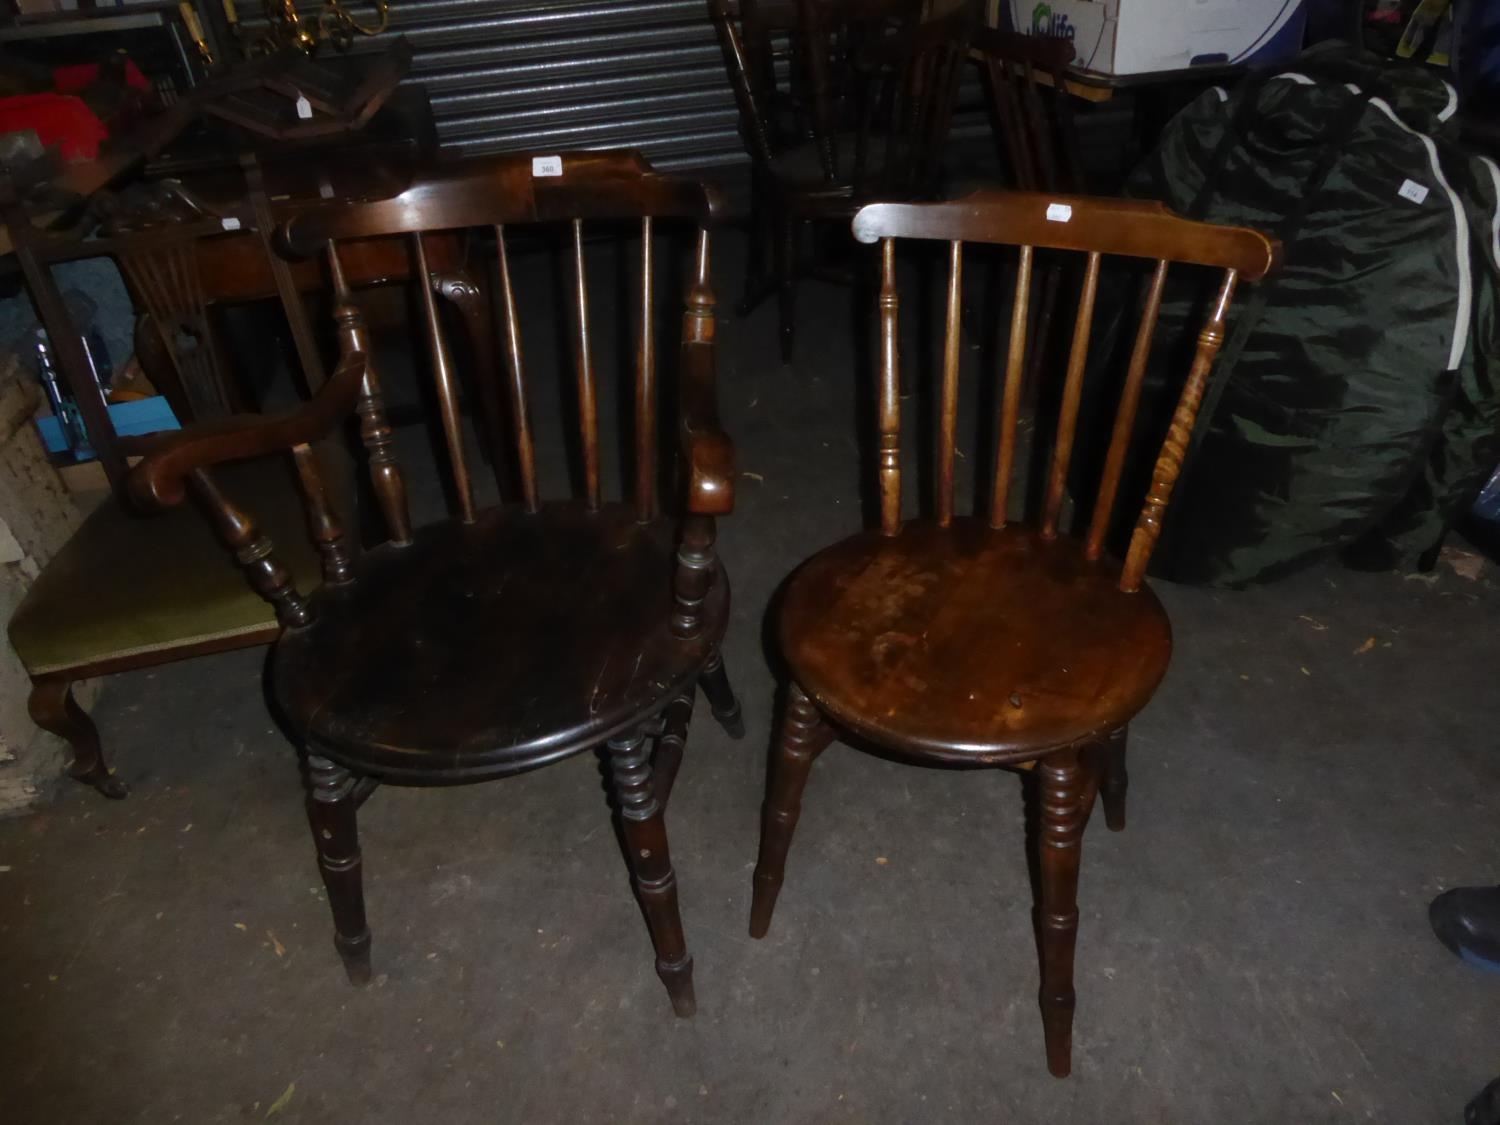 SET OF SEVEN EARLY TWENTIETH CENTURY STAINED WOOD SPINDLE AND STICK BACK CHAIRS (6 + 1), HAVING